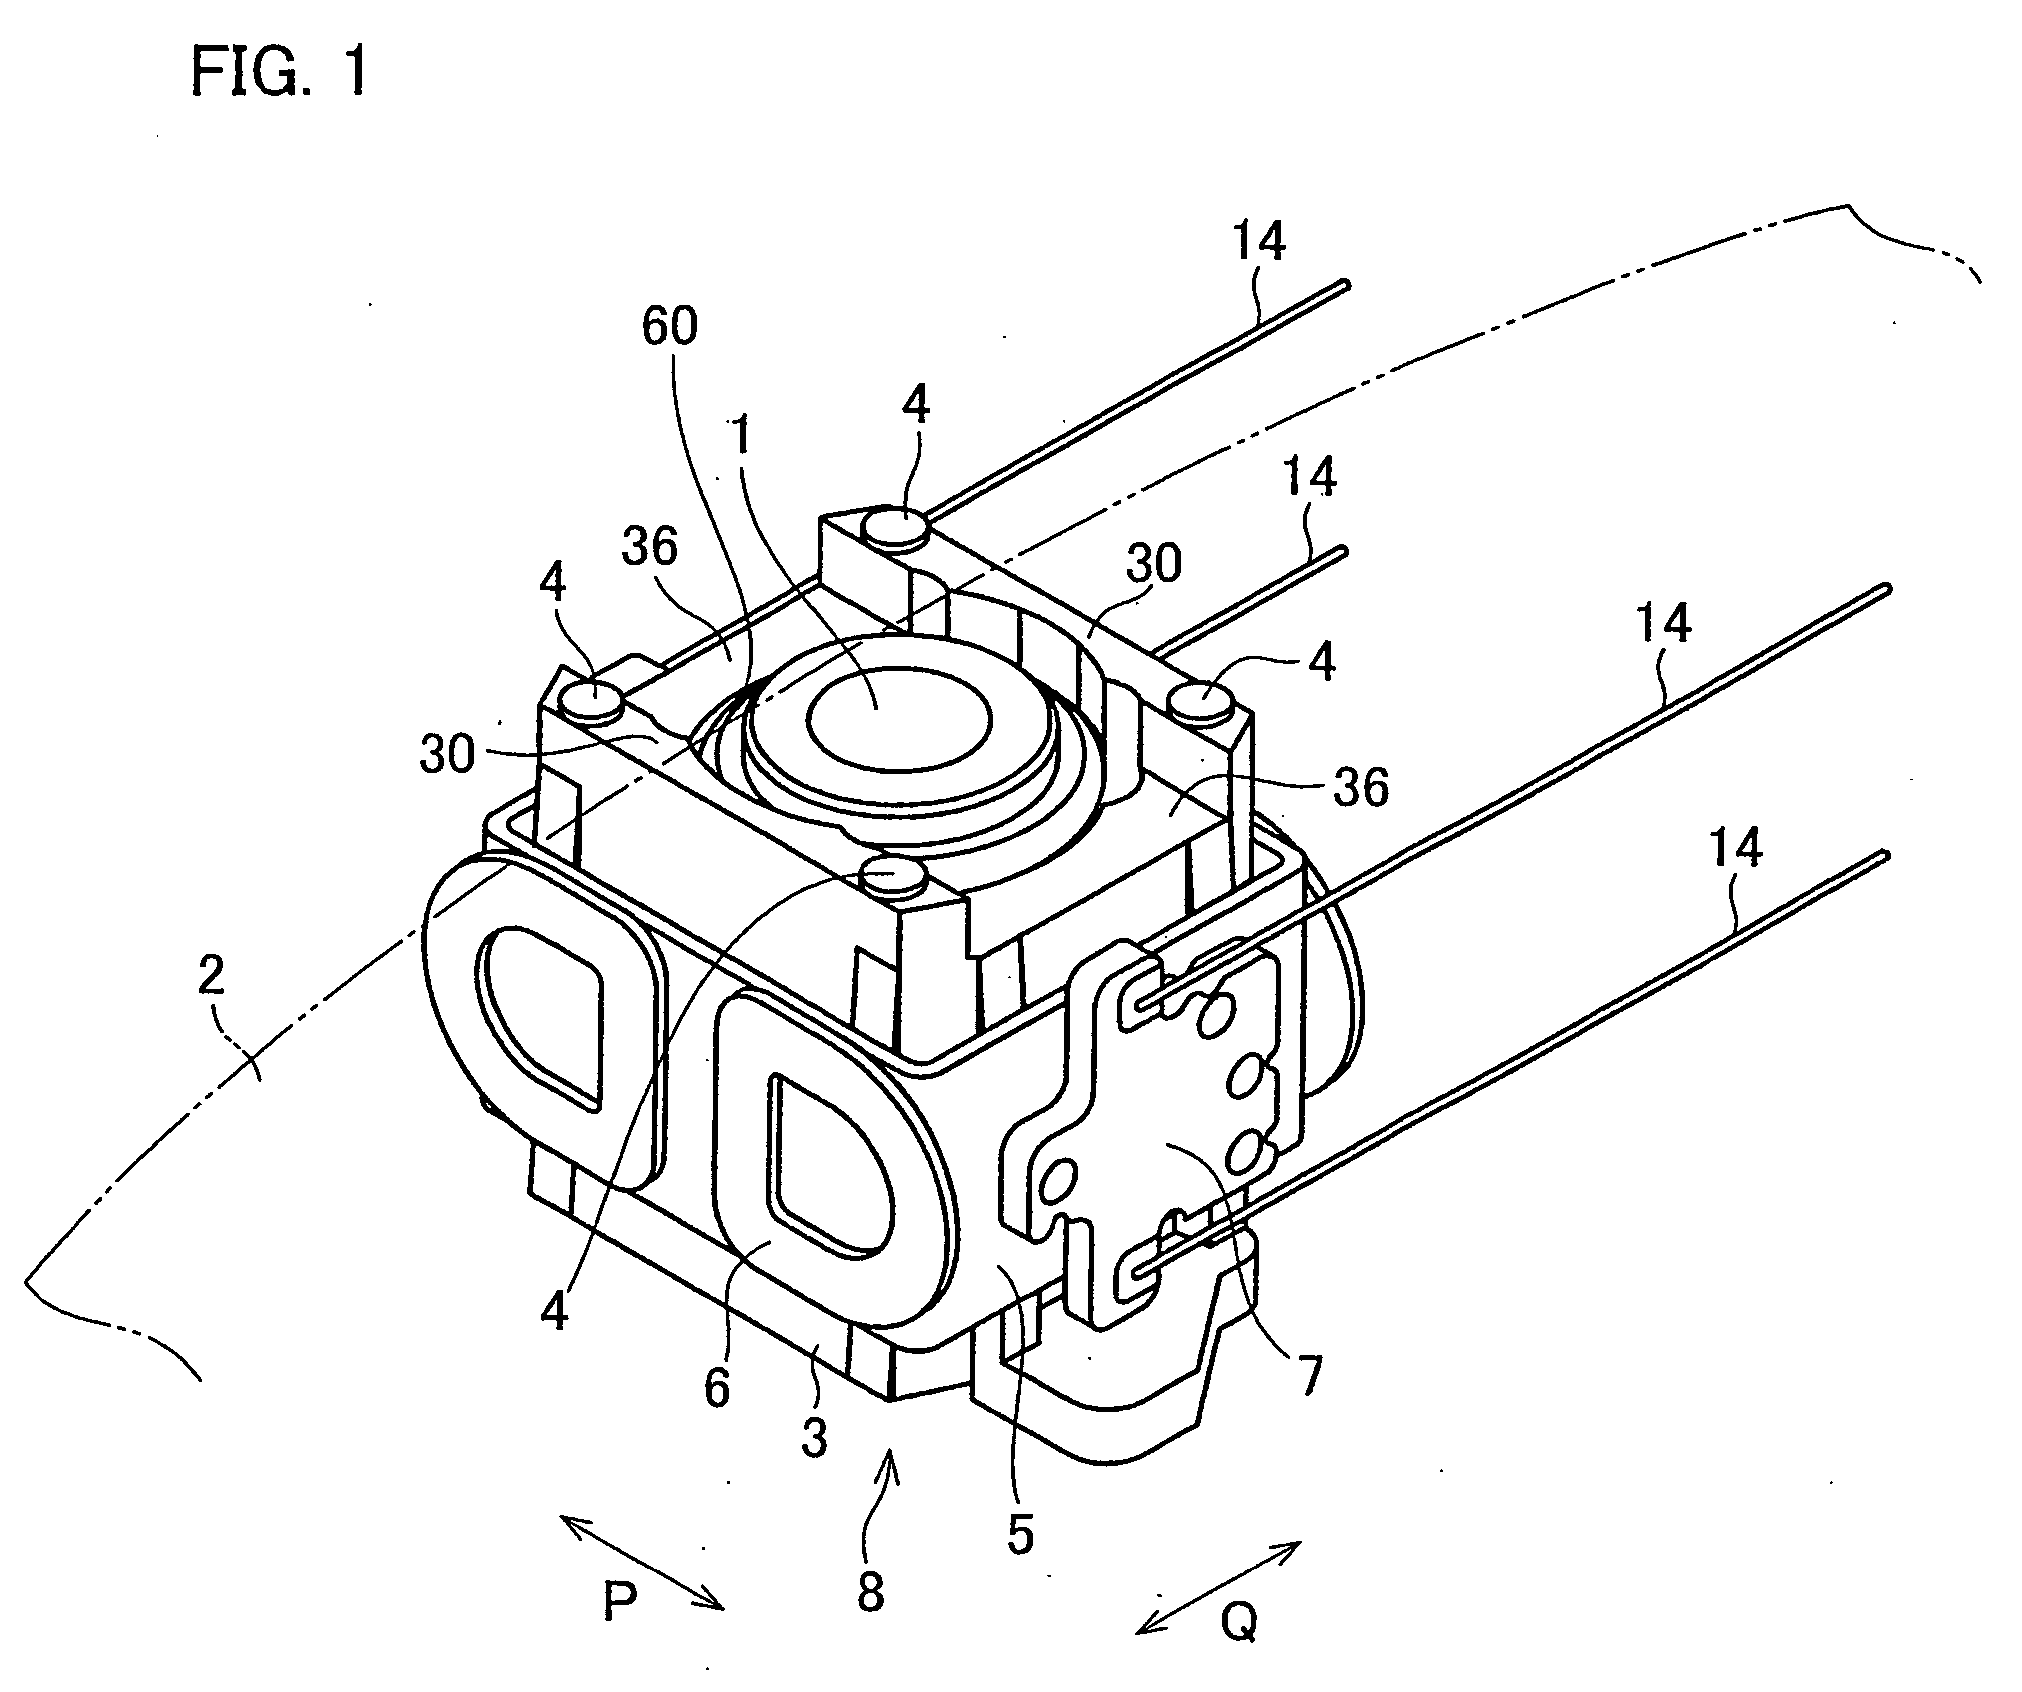 Objective lens holding device and usage thereof